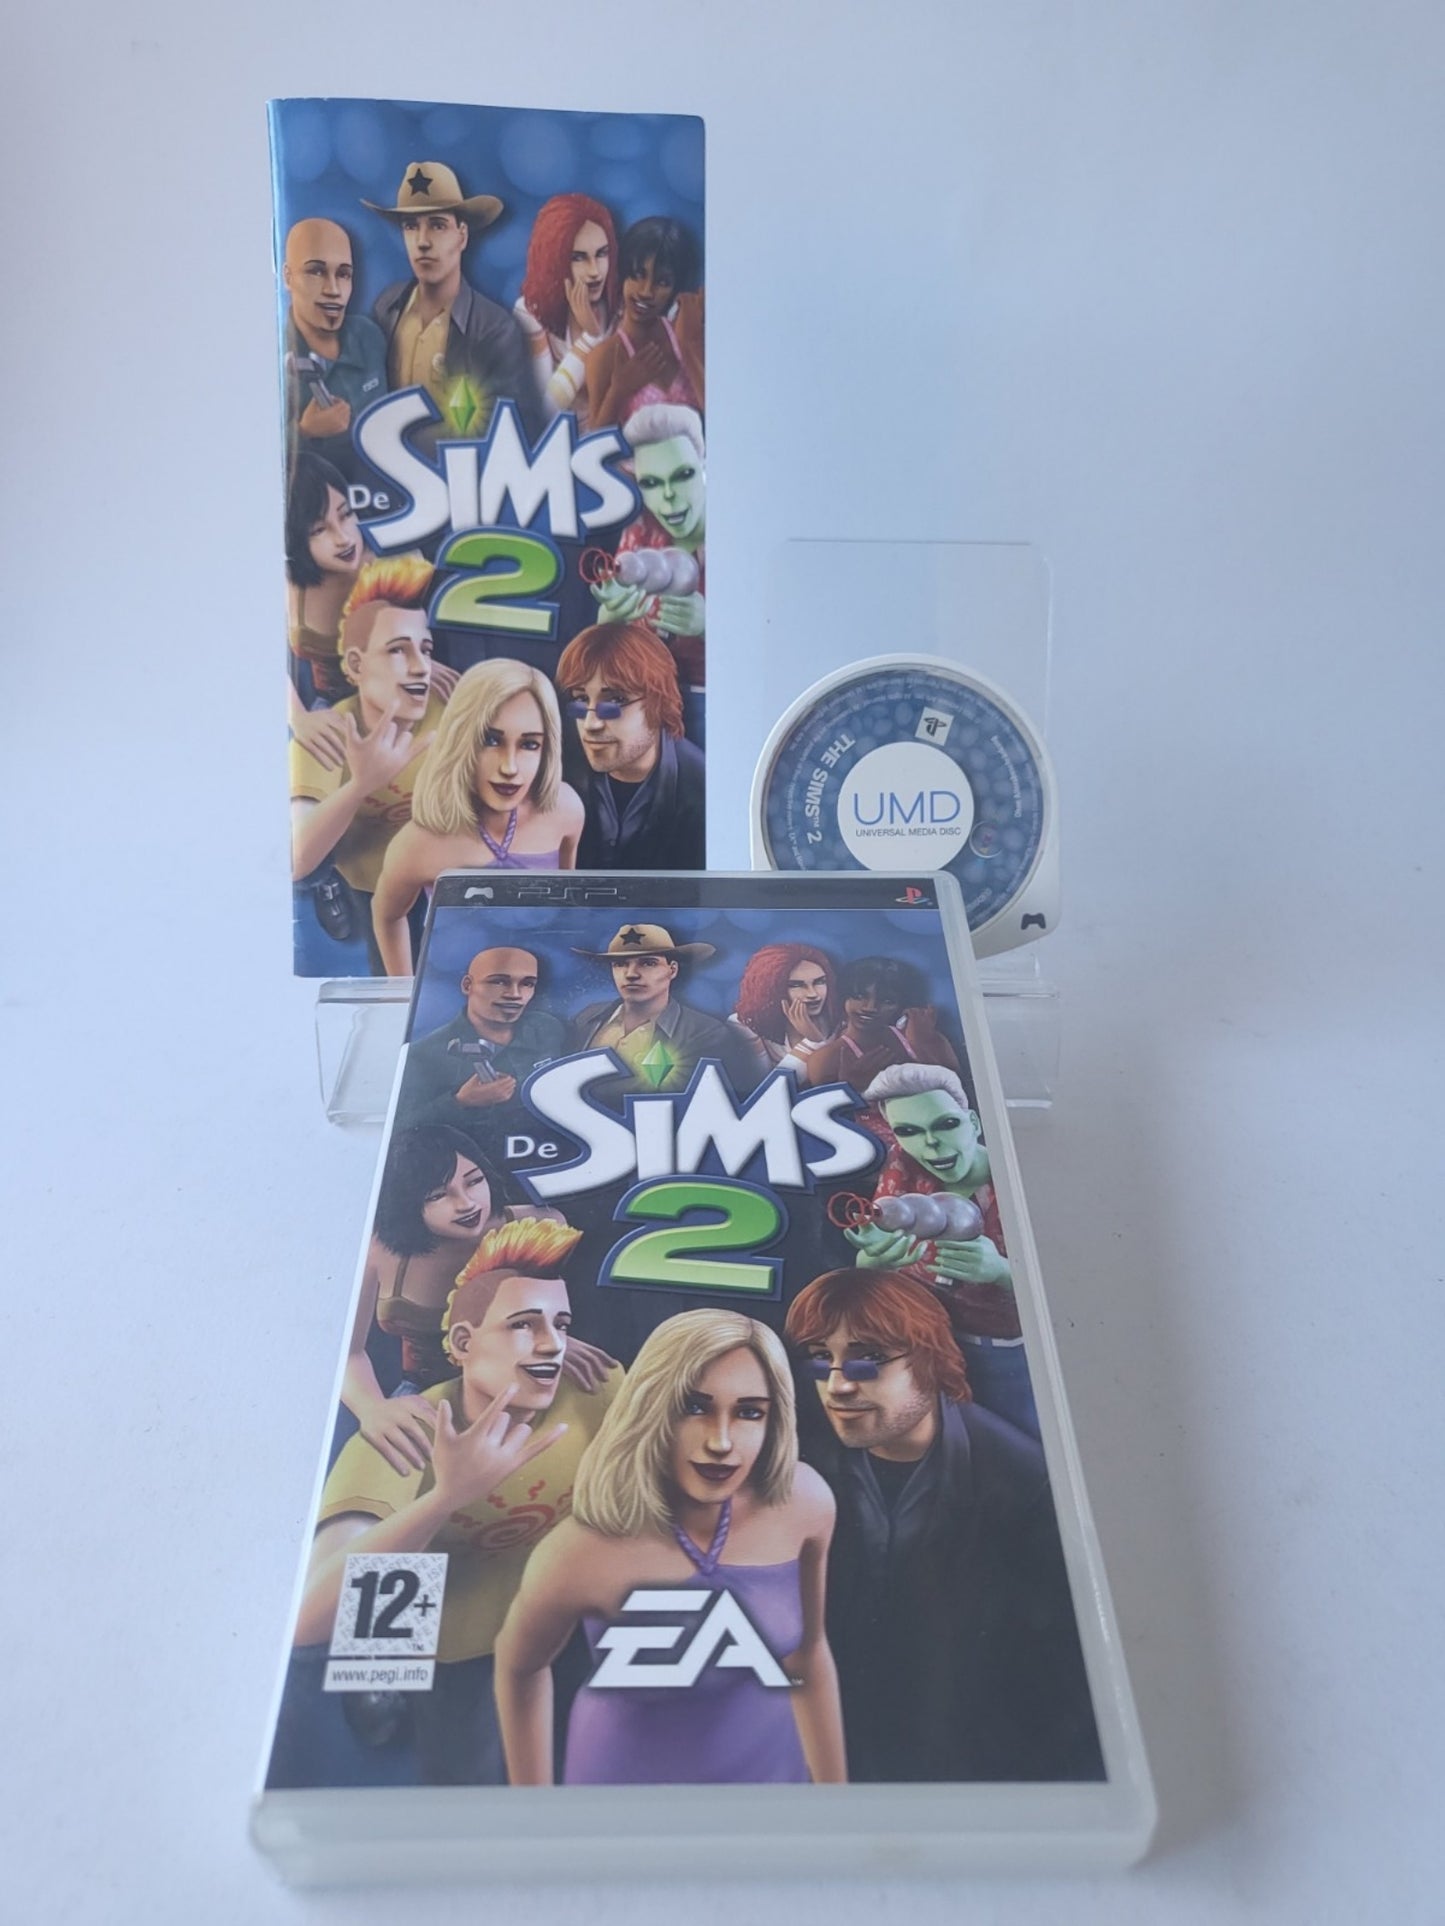 Die Sims 2 Playstation Portable